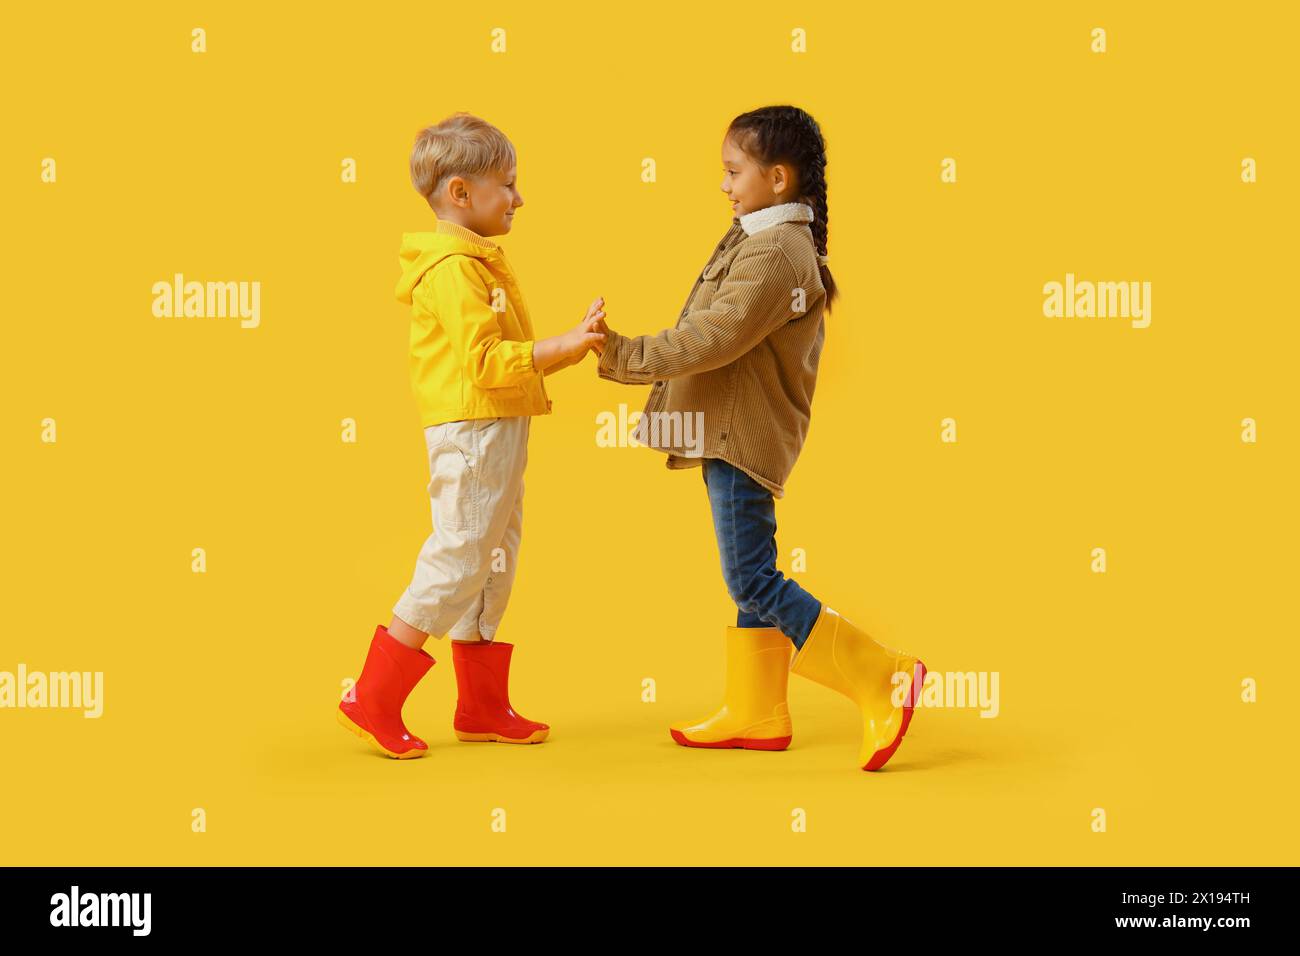 Little children in rubber boots holding hands on yellow background Stock Photo